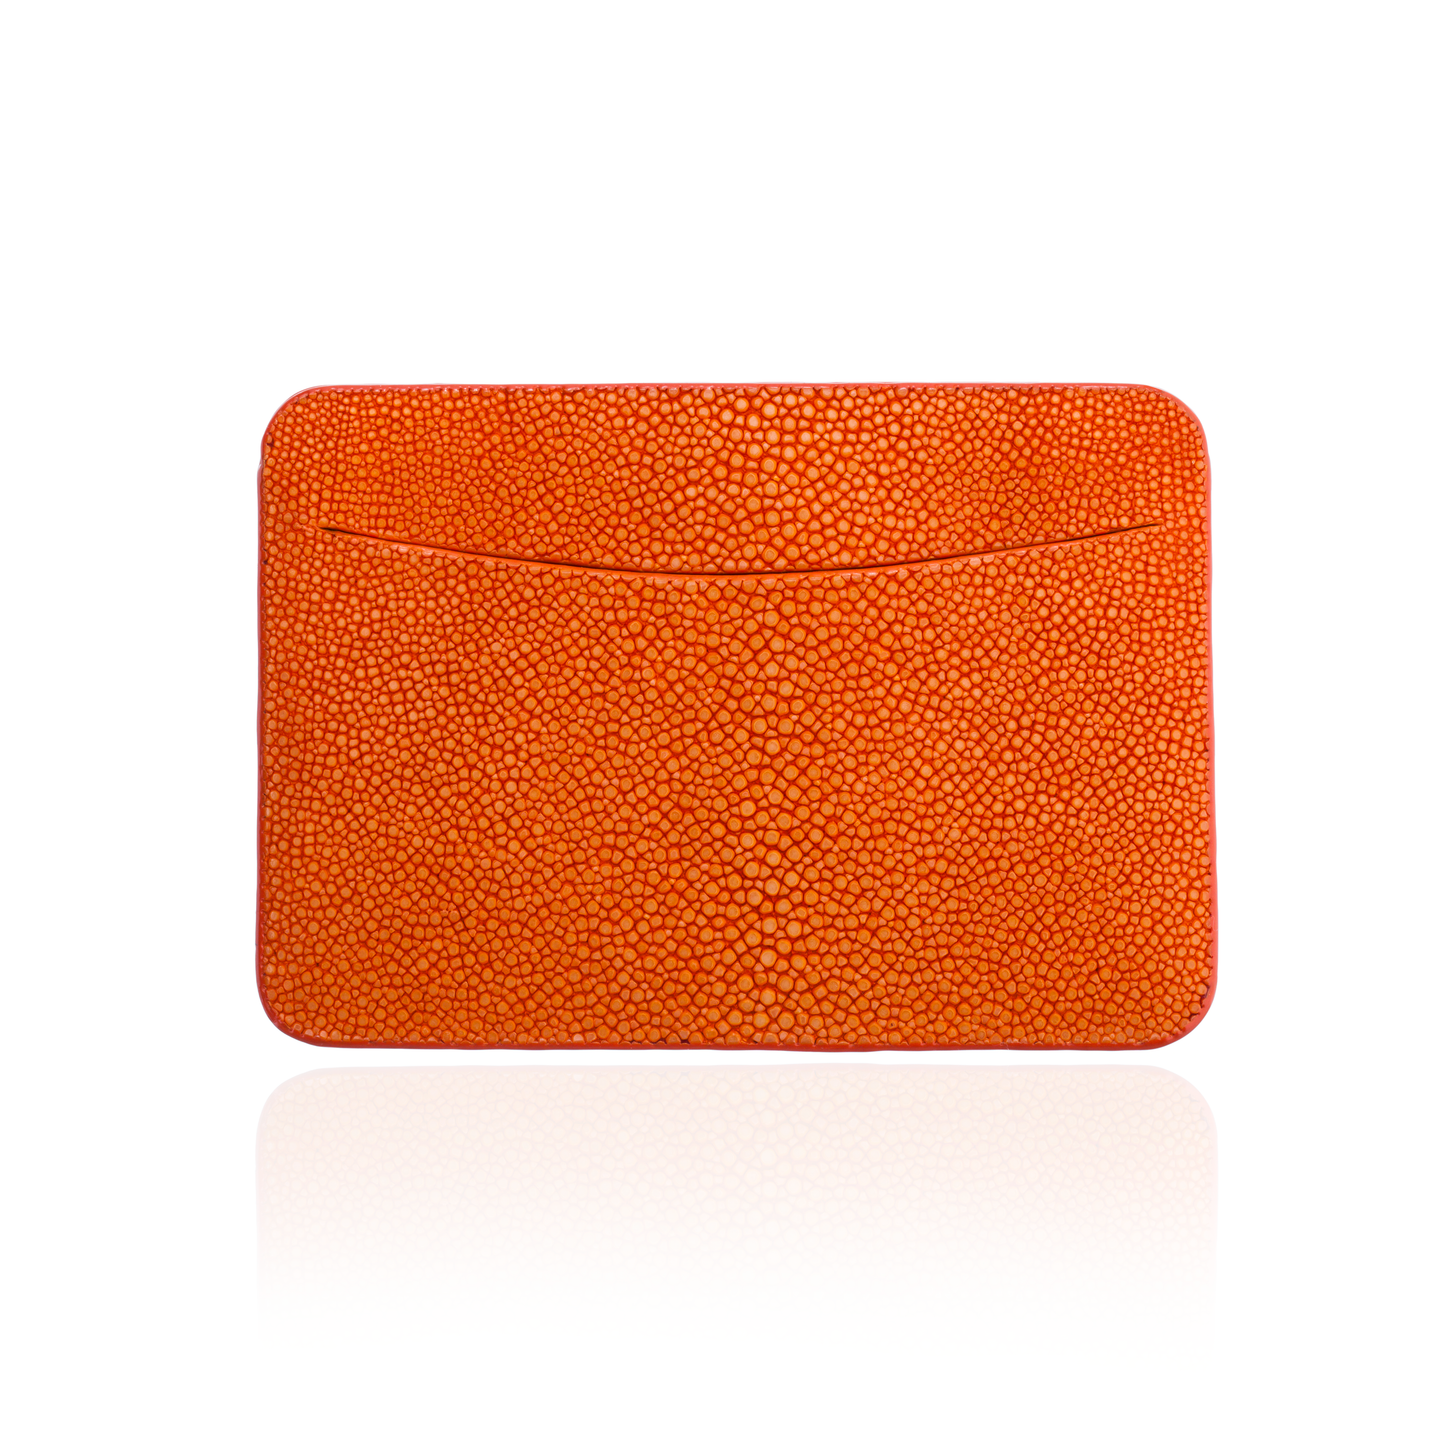 Credit Card Pouch in Orange Stingray Leather